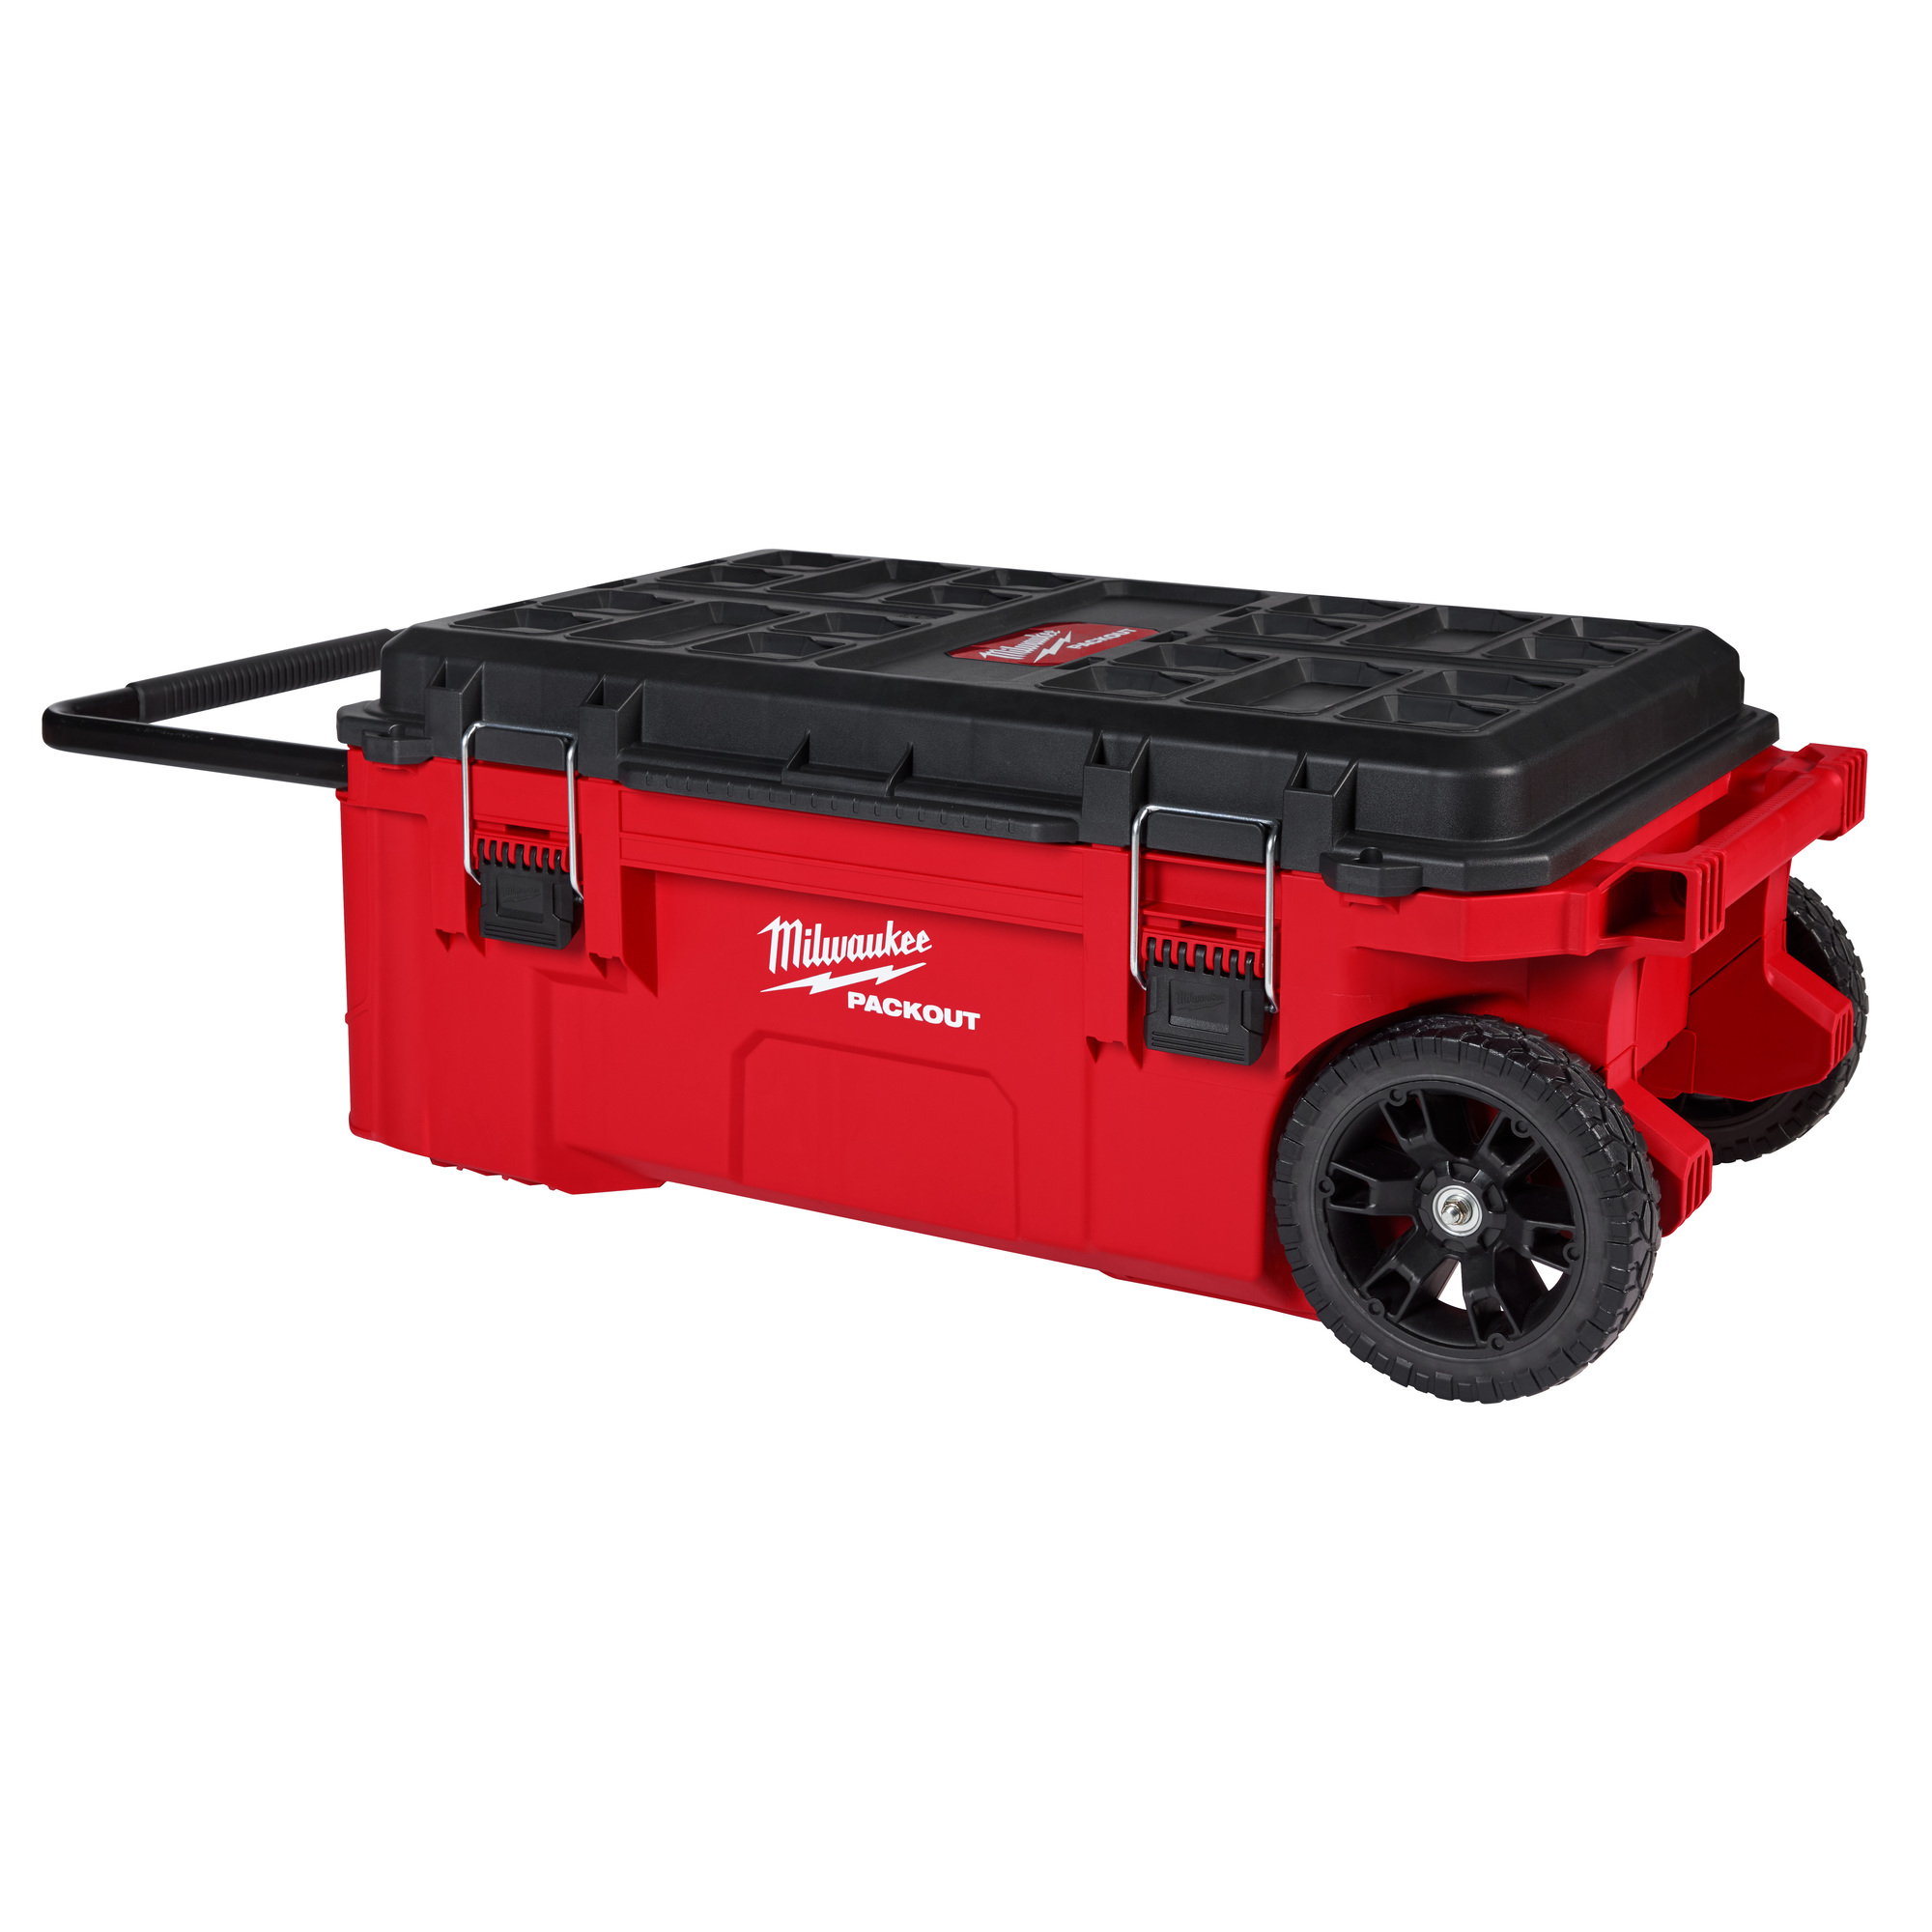 Milwaukee Packout Rolling Tool Chest with Dual Stack Top, 38Inch L x 24Inch W x 15.8Inch H, Model 48-22-8428